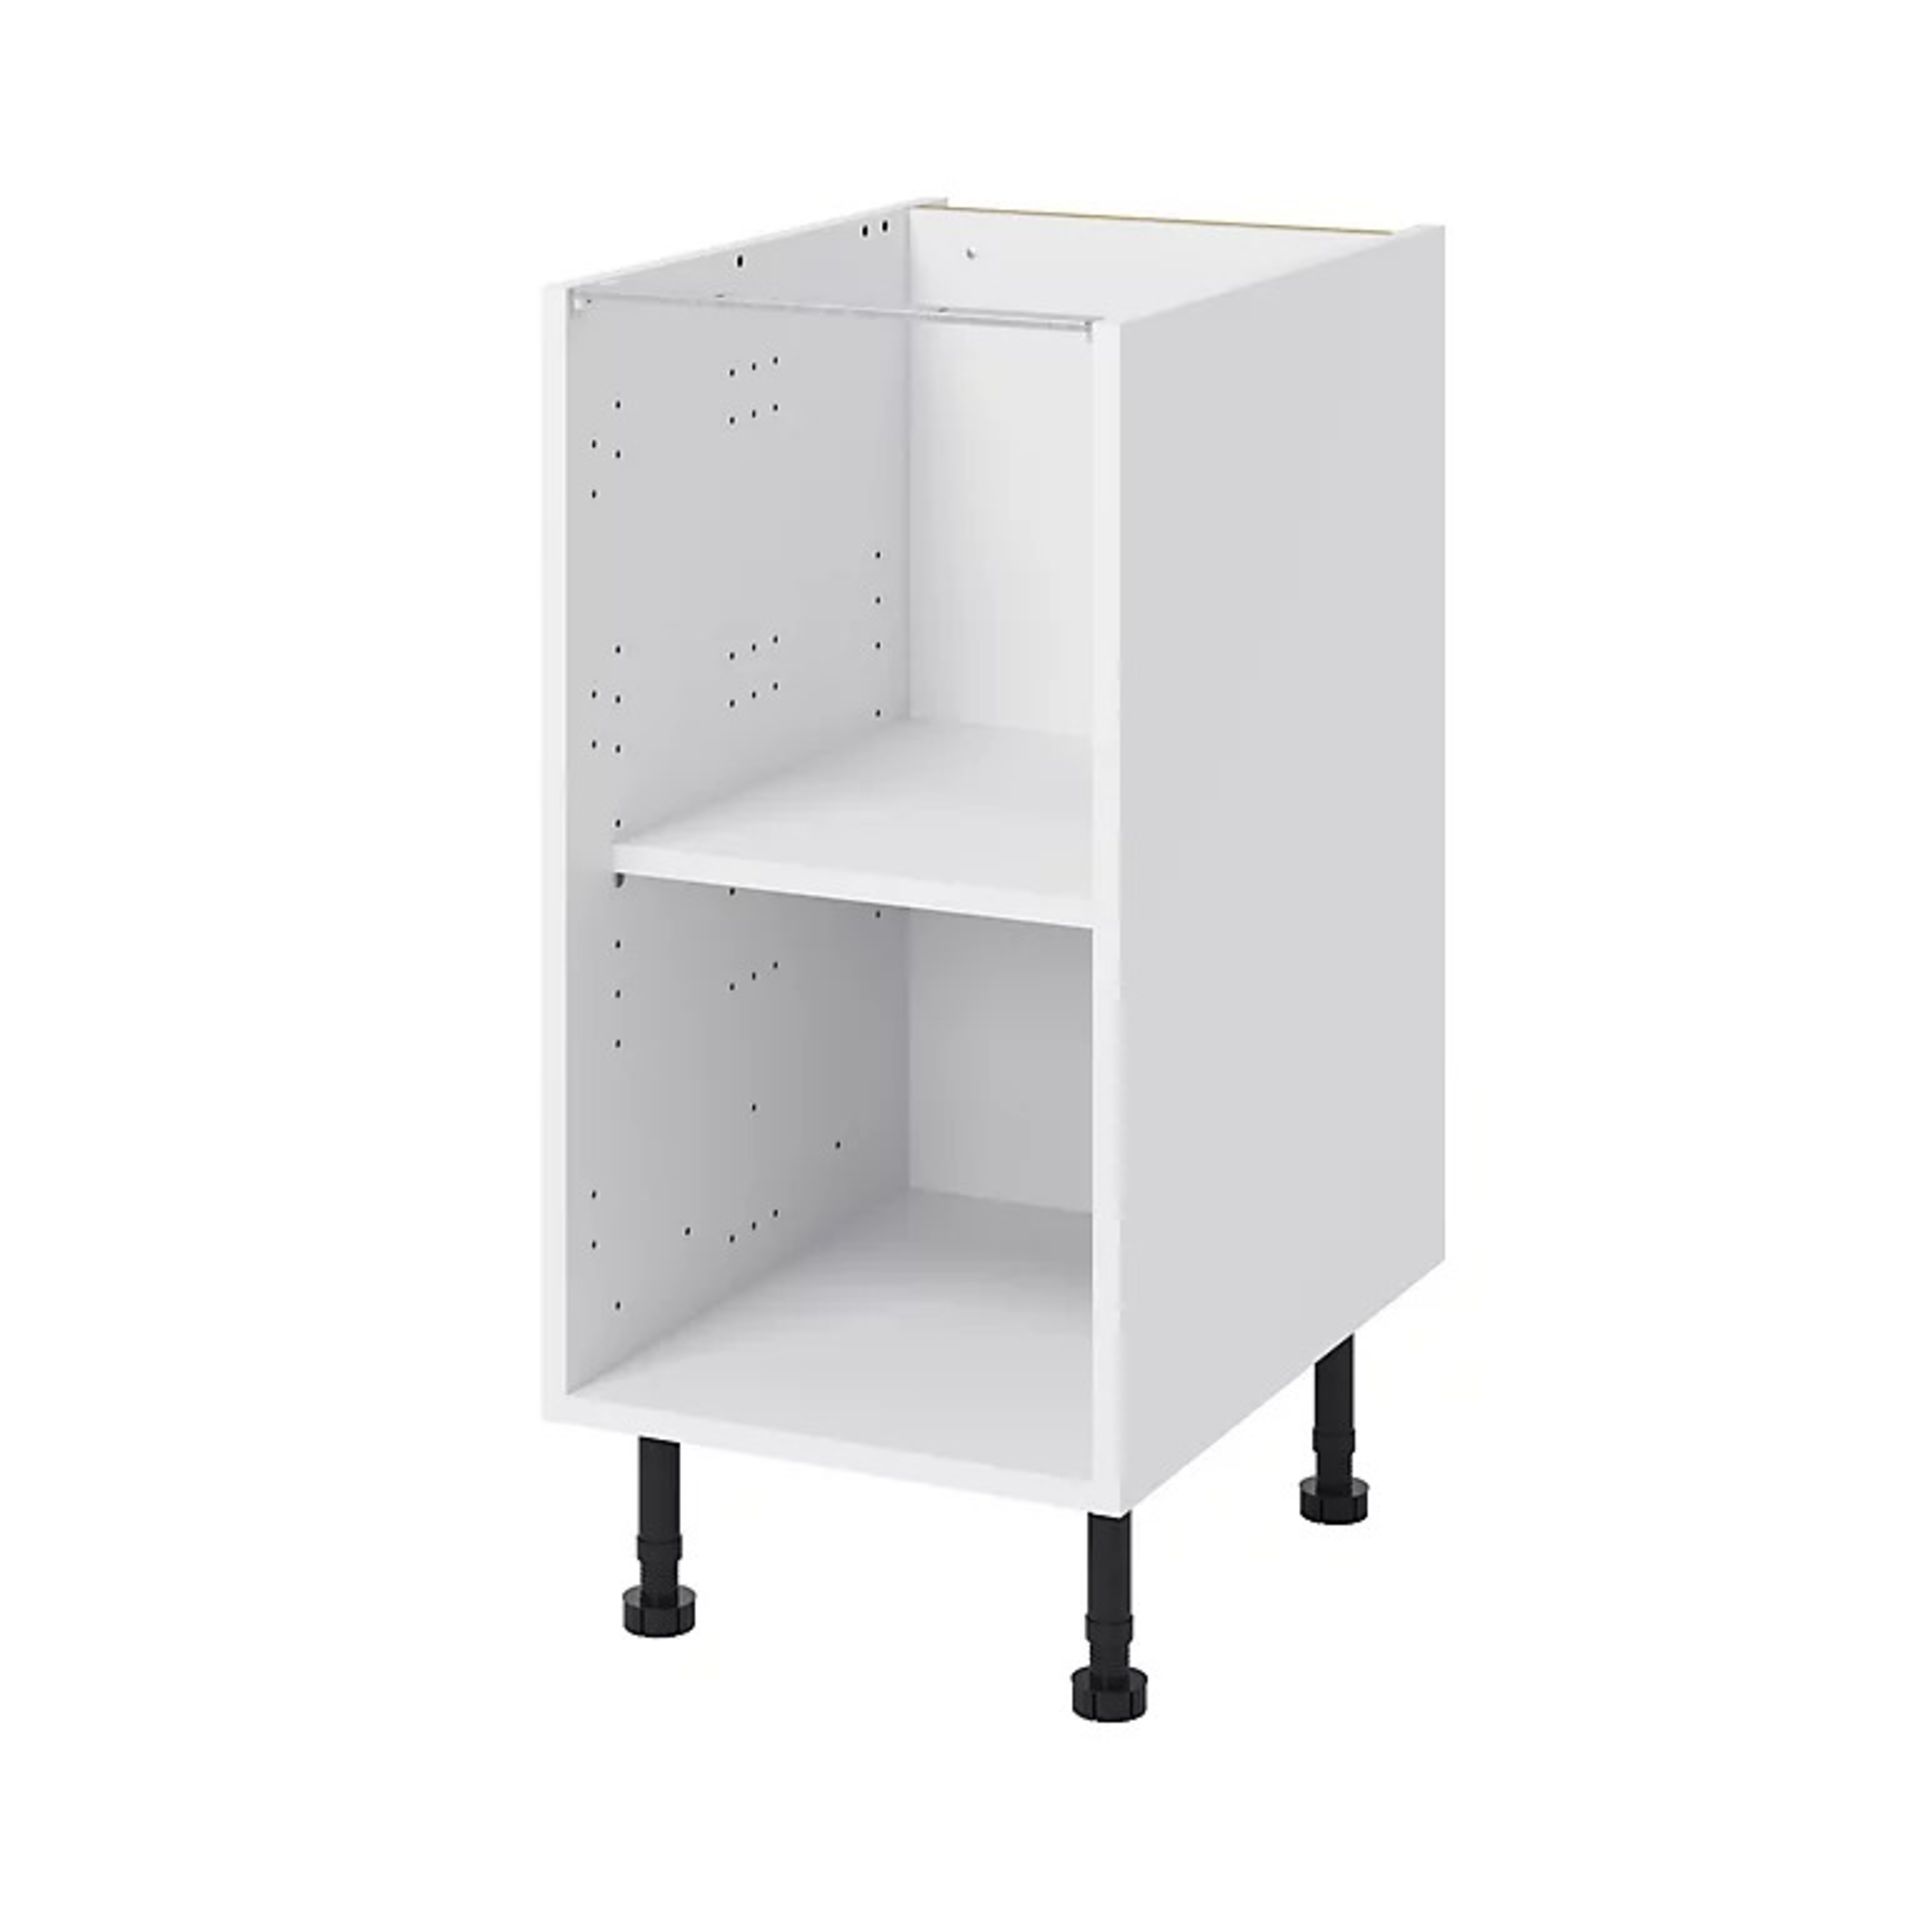 GoodHome Caraway White Base unit, (W)400mm - ER47